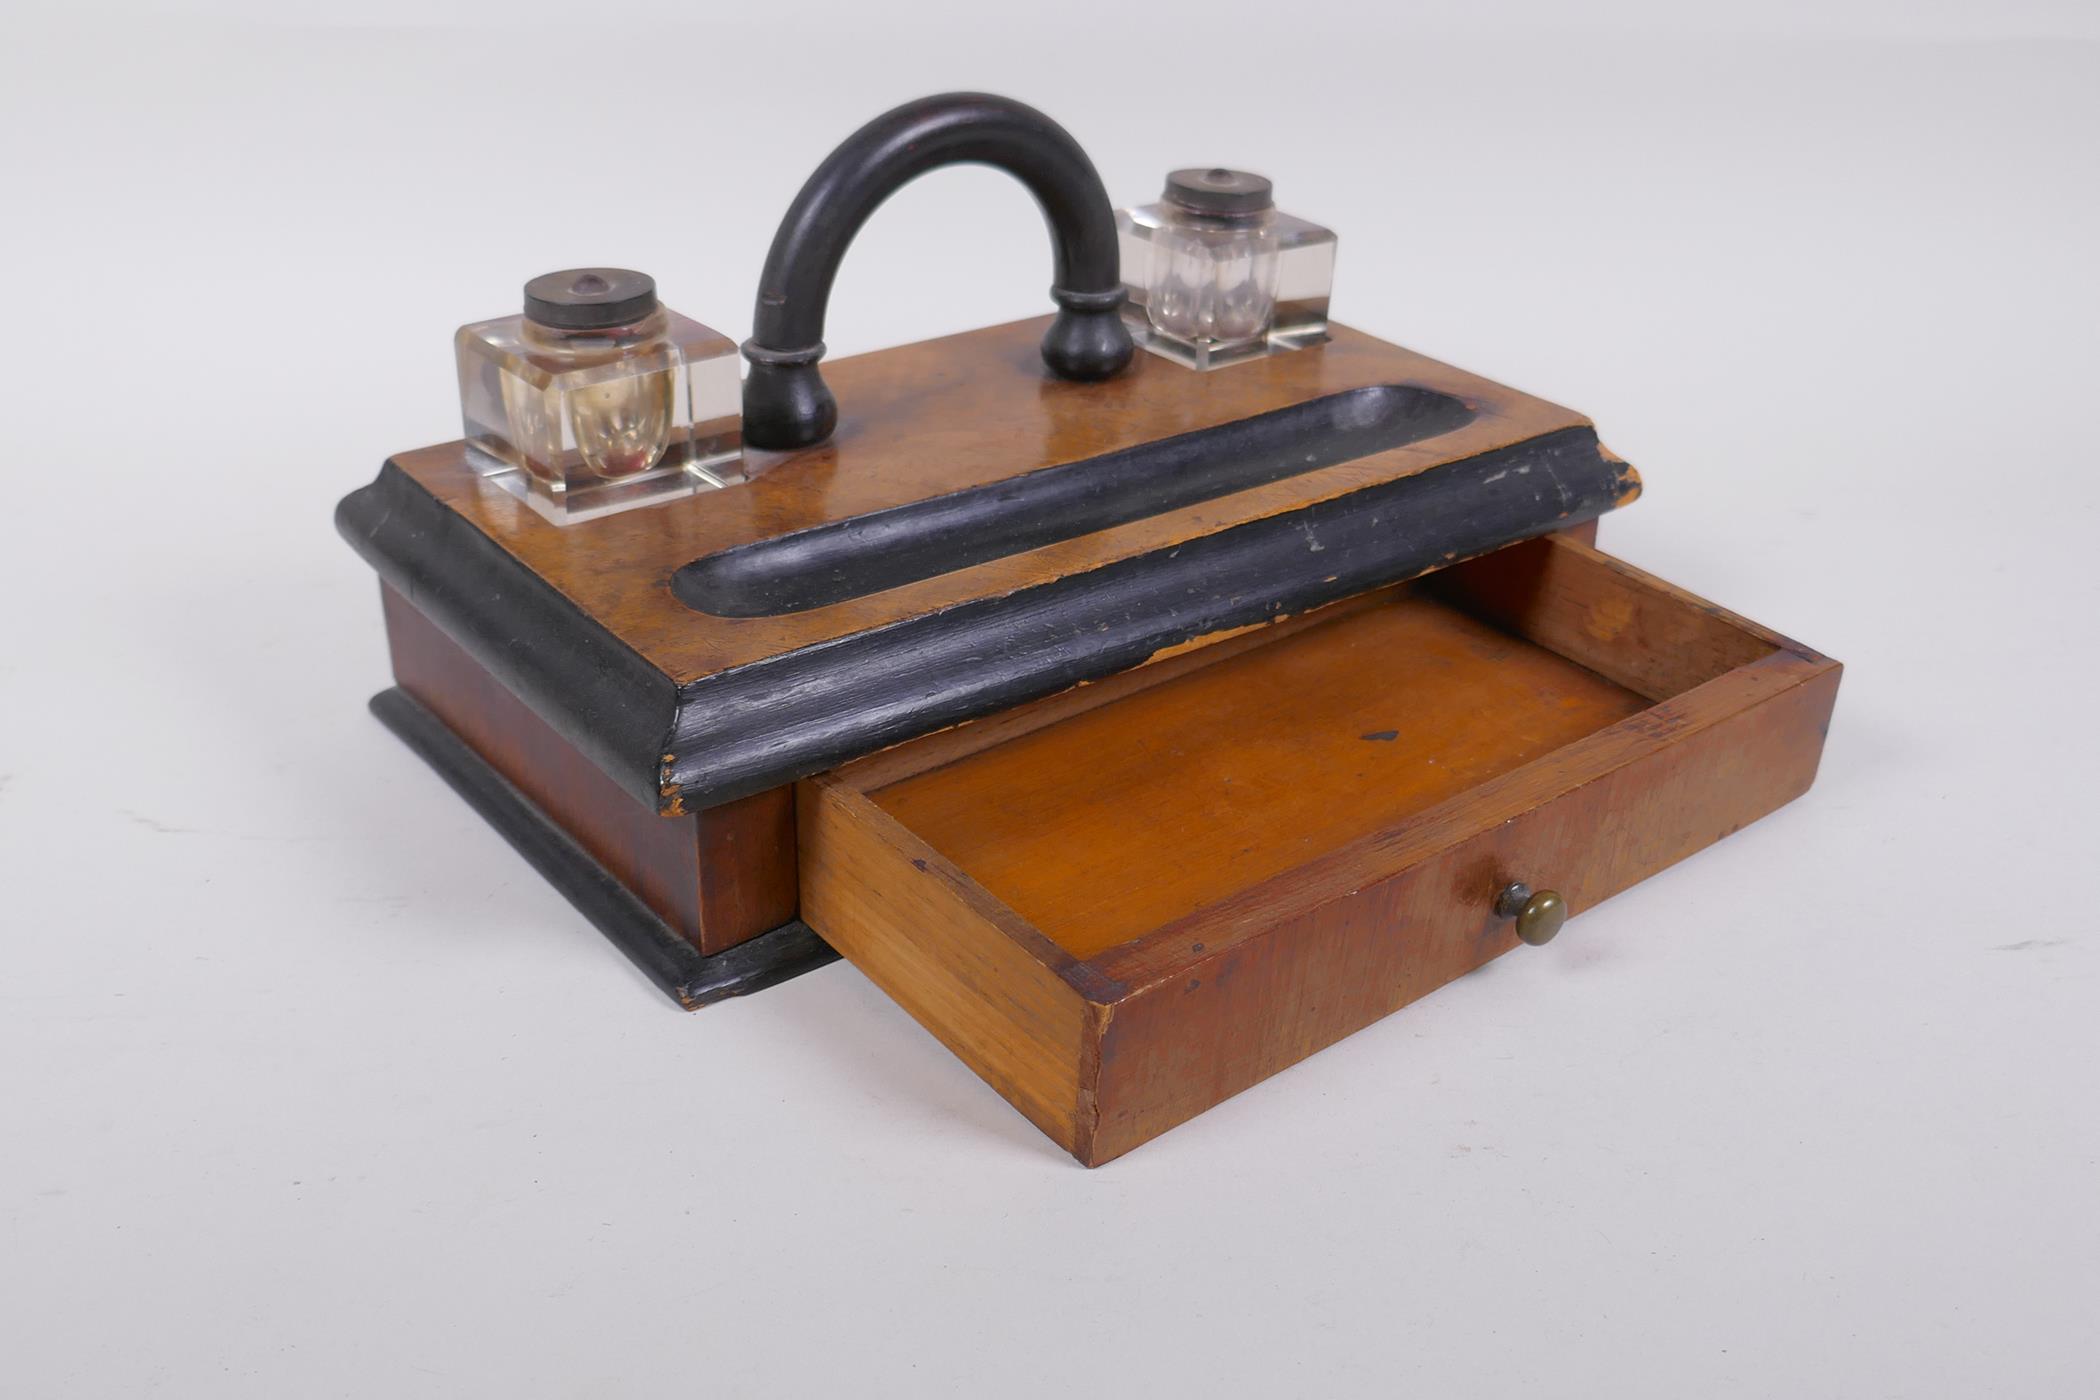 An antique ebonised walnut desk set with twin glass ink wells and a single drawer, 28 x 16cm - Image 3 of 3